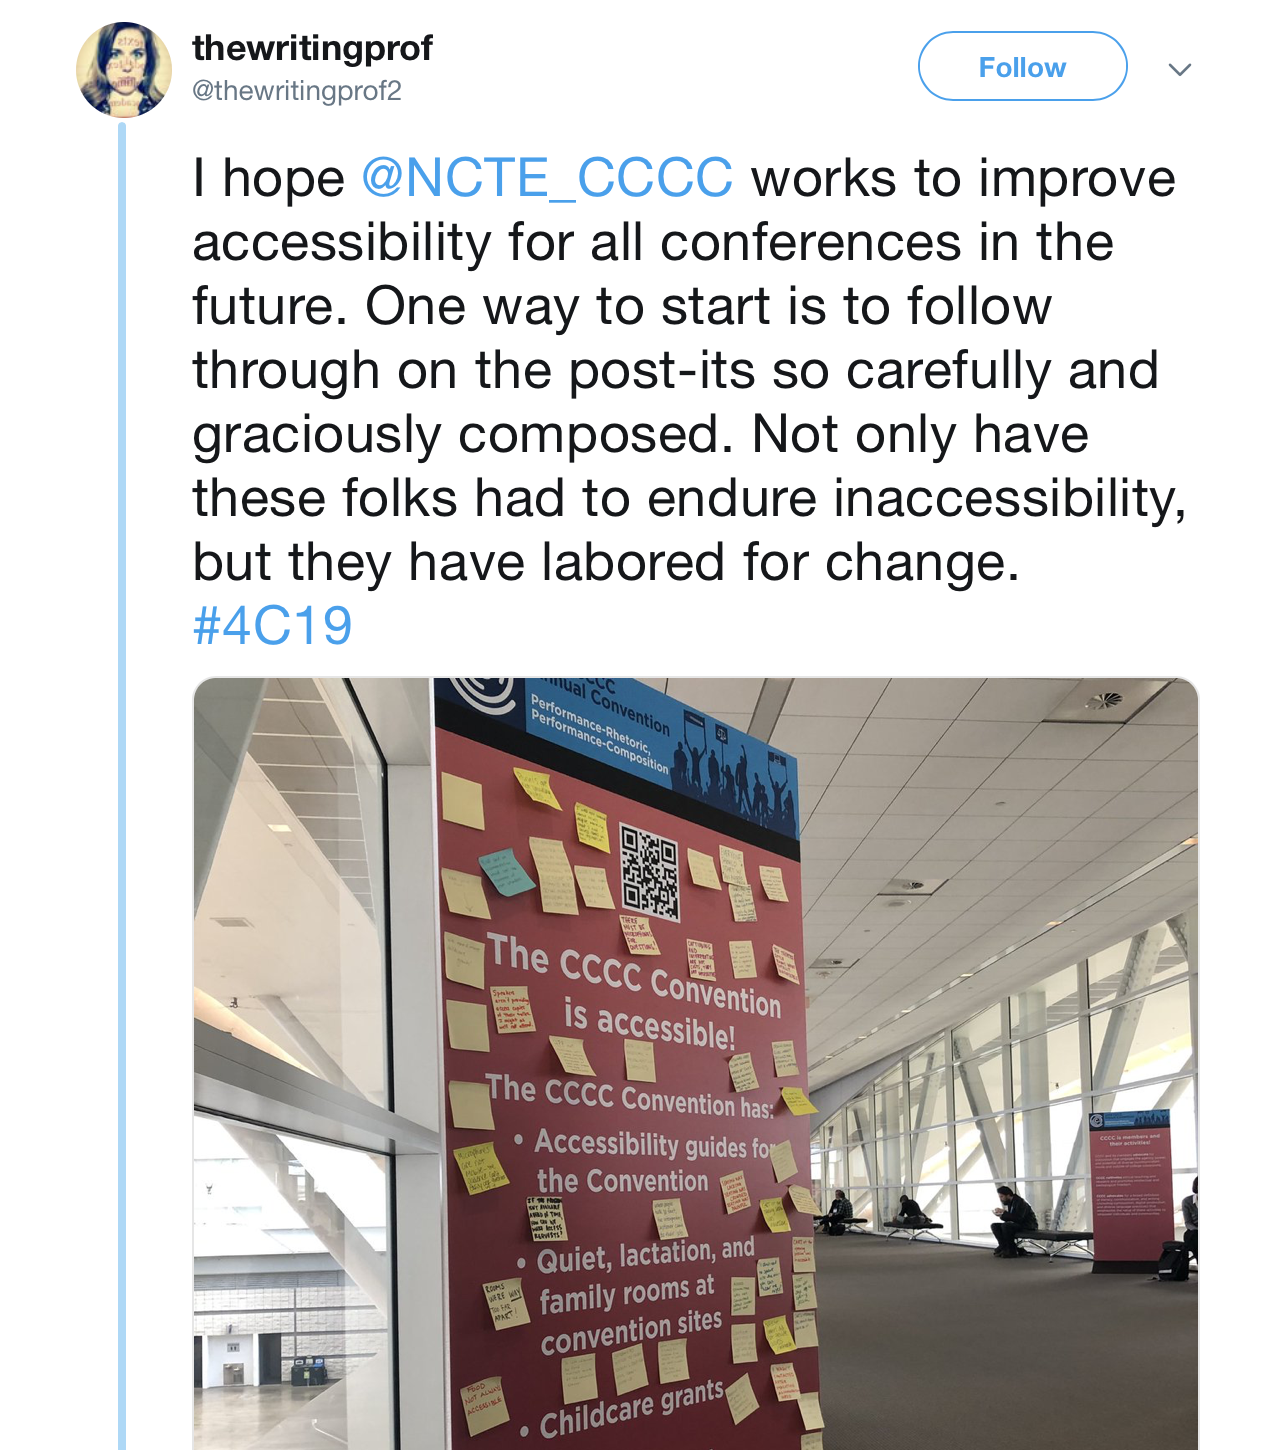 Tweet from @thewritingprof2, they starts “I hope @NCTE_CCCC works to improve accessibility for all conferences in the future….” And includes photo of a sign from the 4Cs conference claiming that the conference is accessible. 